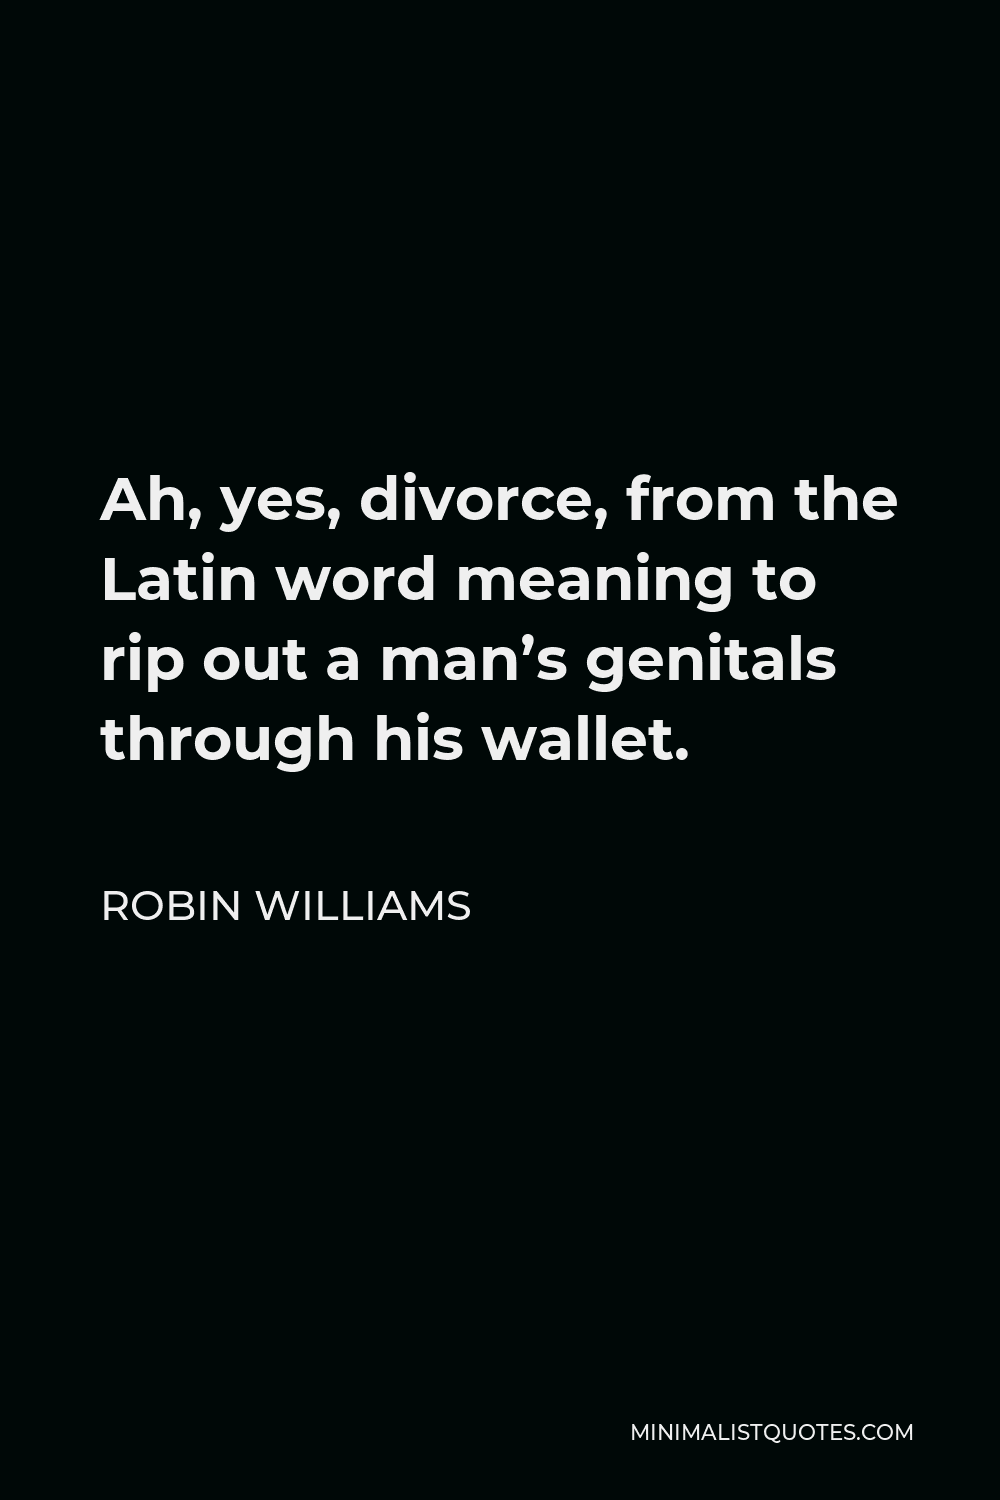 Robin Williams Quote - Ah, yes, divorce, from the Latin word meaning to rip out a man’s genitals through his wallet.